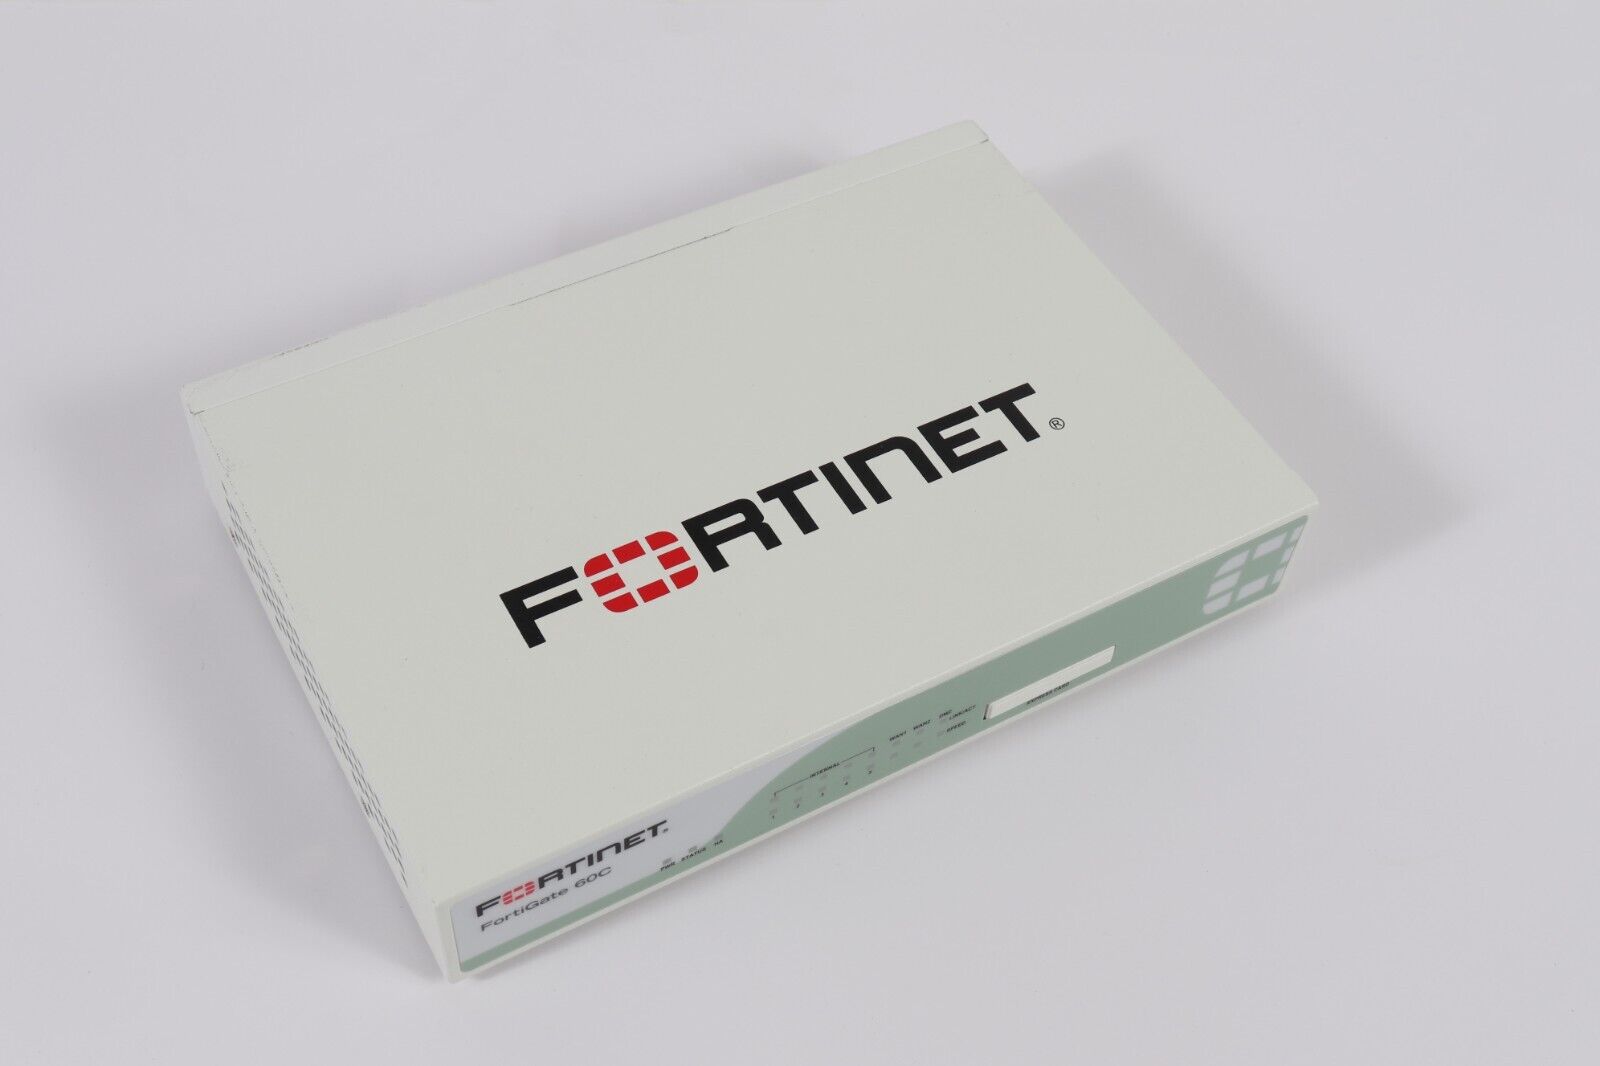 Fortinet FortiGate 60C FG-60C Router Firewall Security Appliance - TESTED -